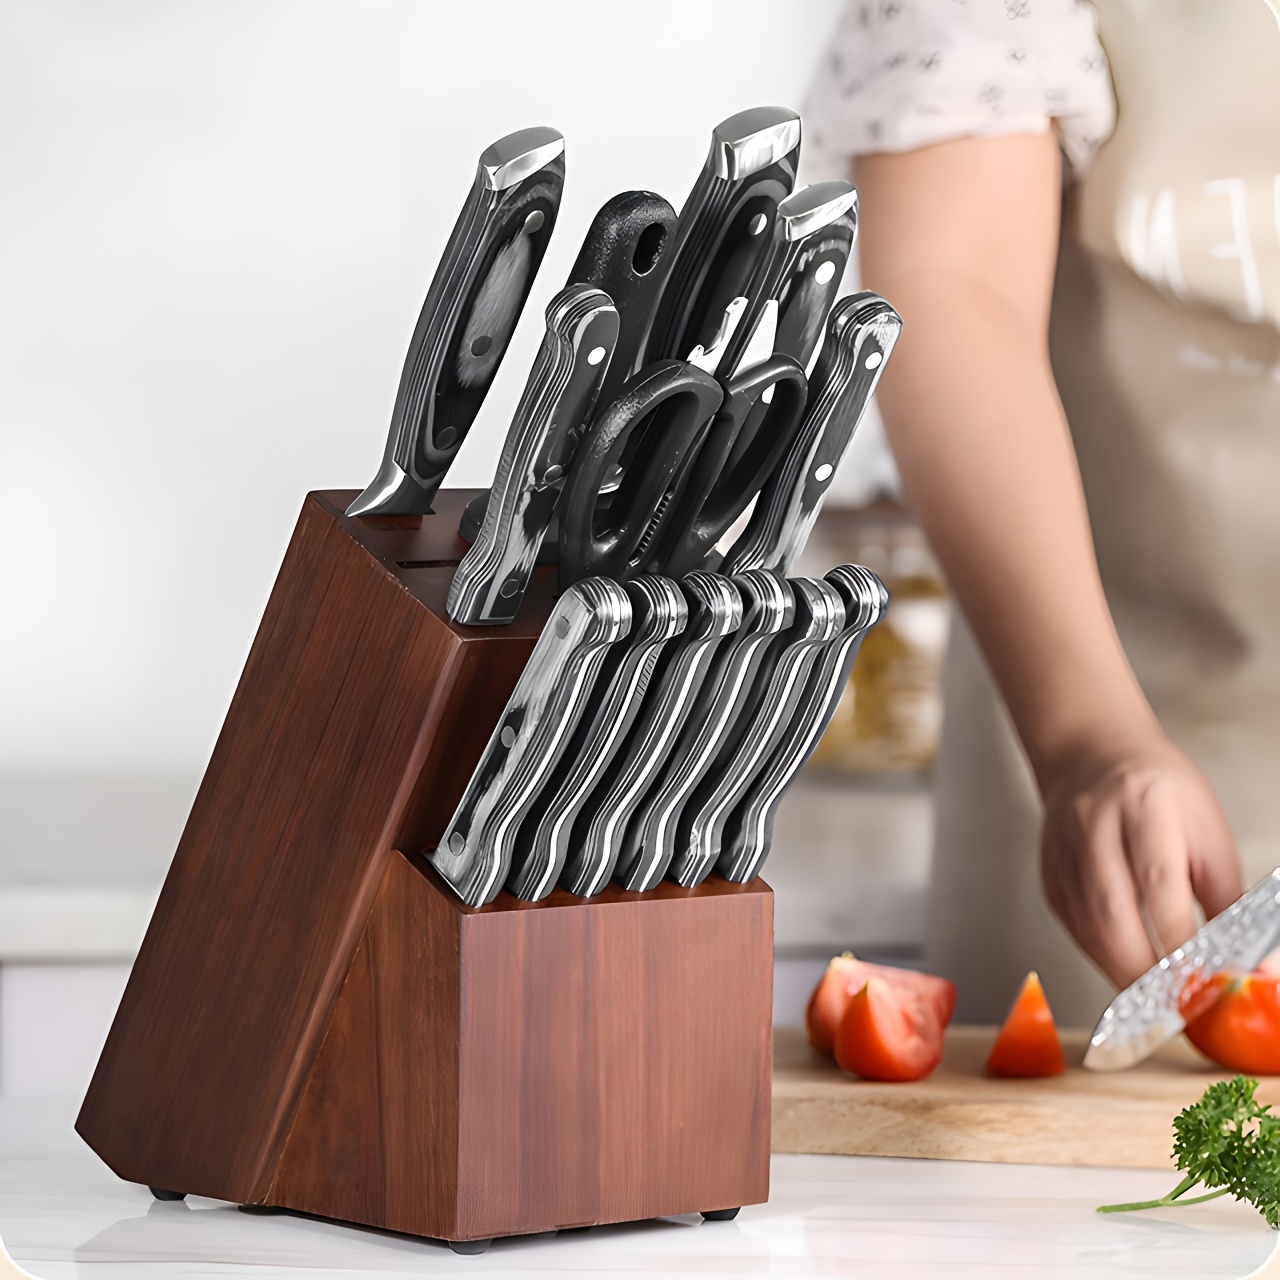 

Wooden Knife Block Stand - Kitchen Knife Storage Organizer Holder - Durable And Elegant Knife Rack For Safe And Neat Cutlery Organization